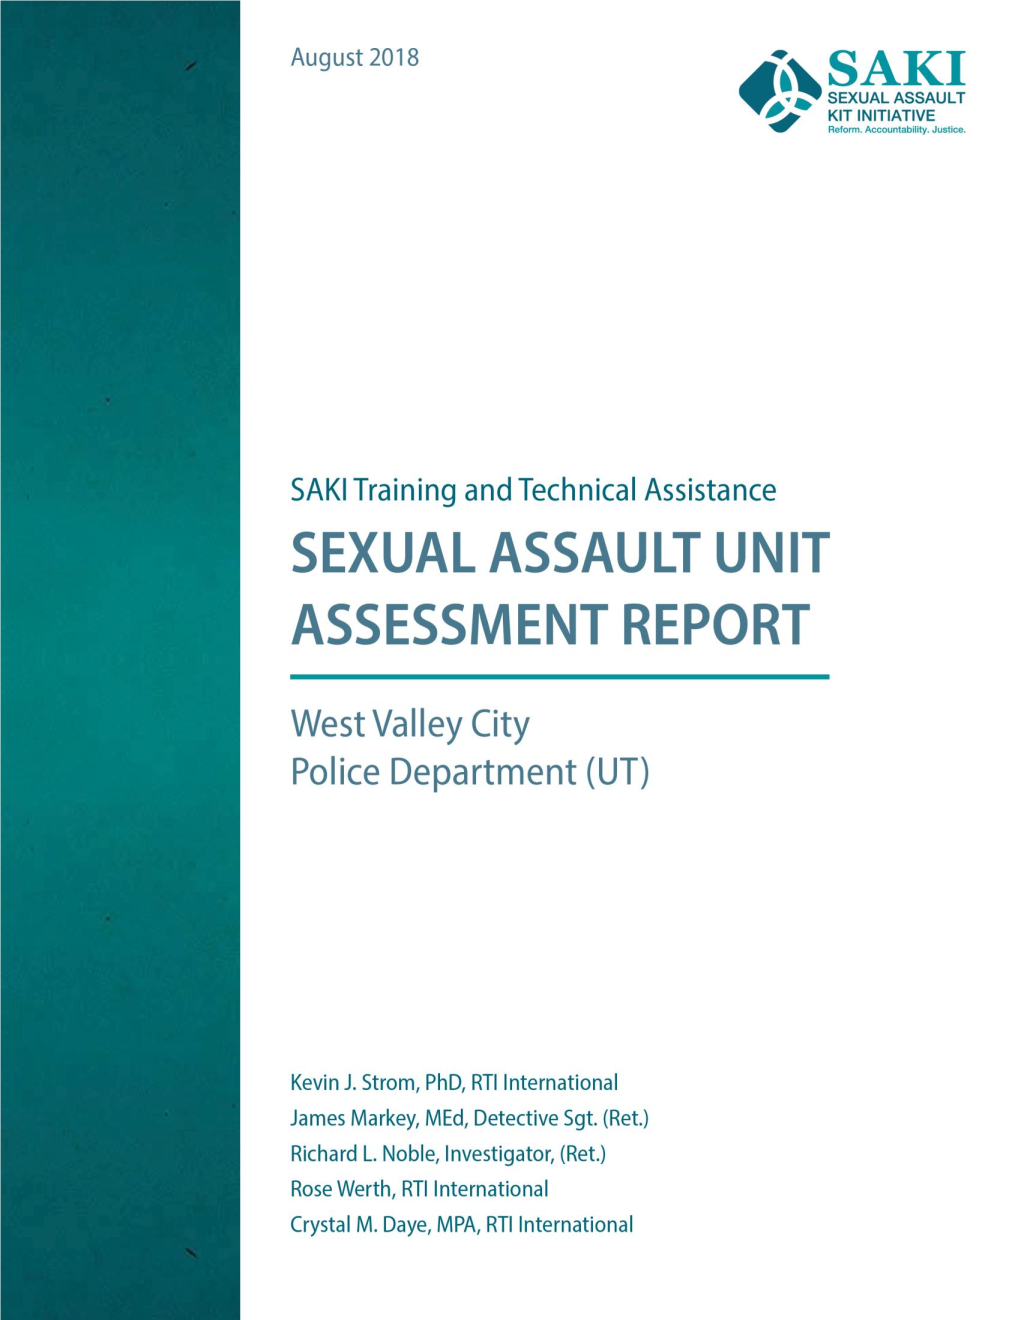 West Valley Police Department SAU Assessment Final Report